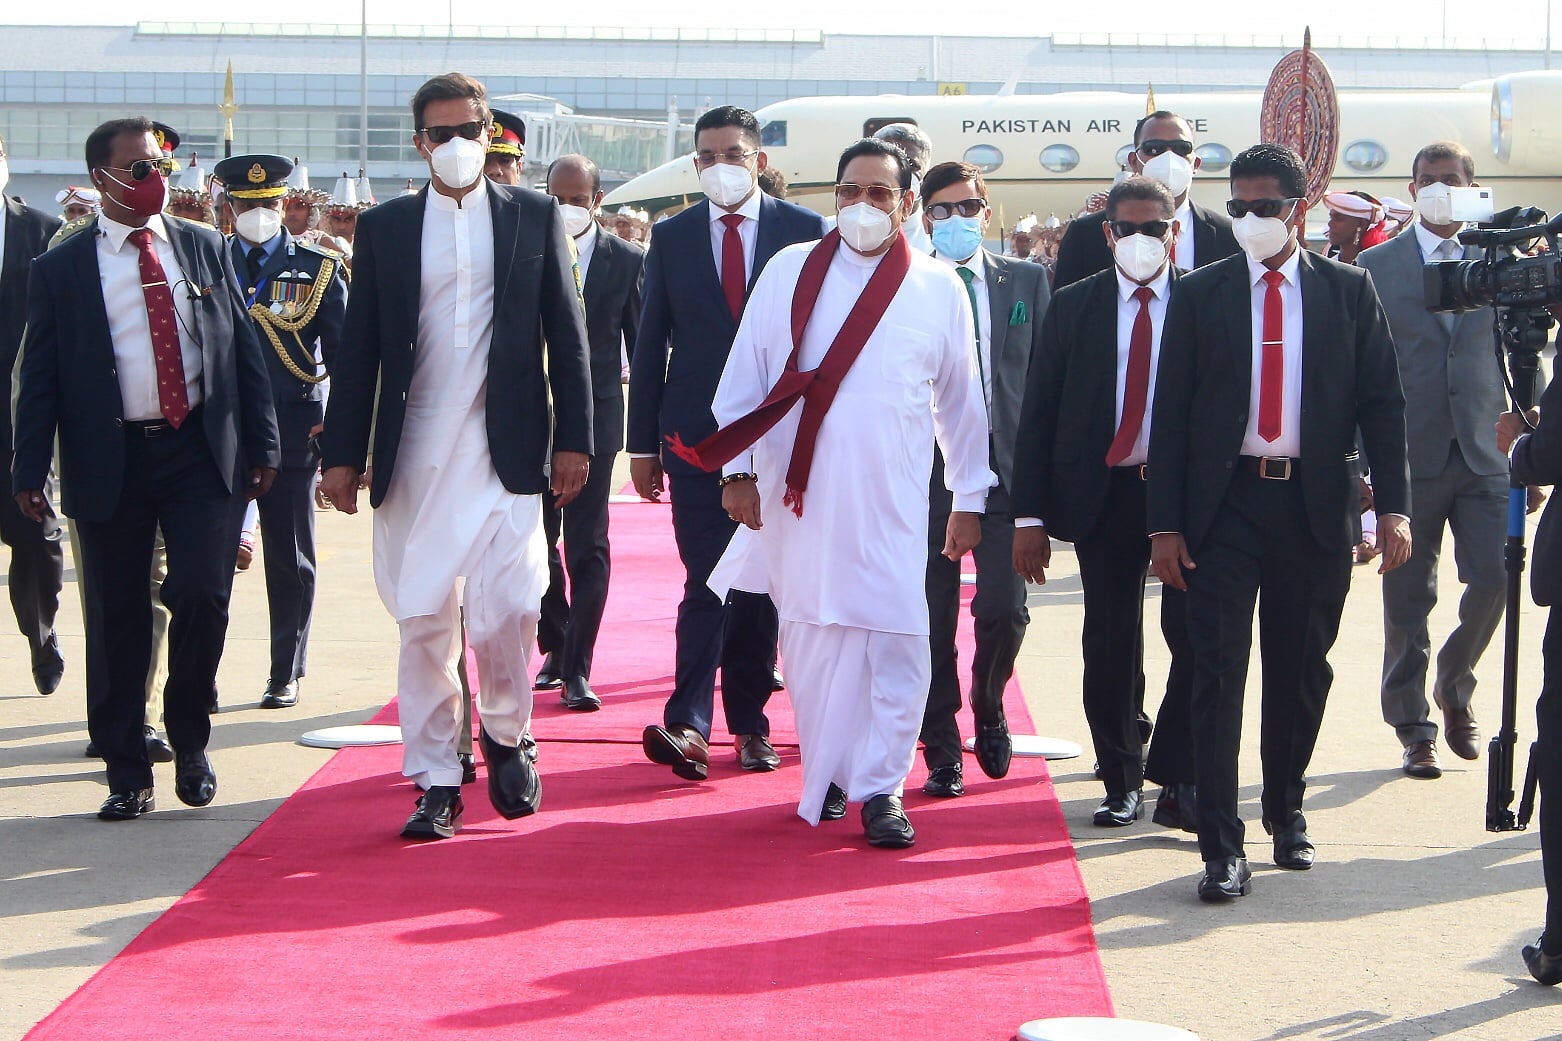 Prime Minister of Pakistan H.E. Imran Khan and the delegation arrived in Sri Lanka today (23)